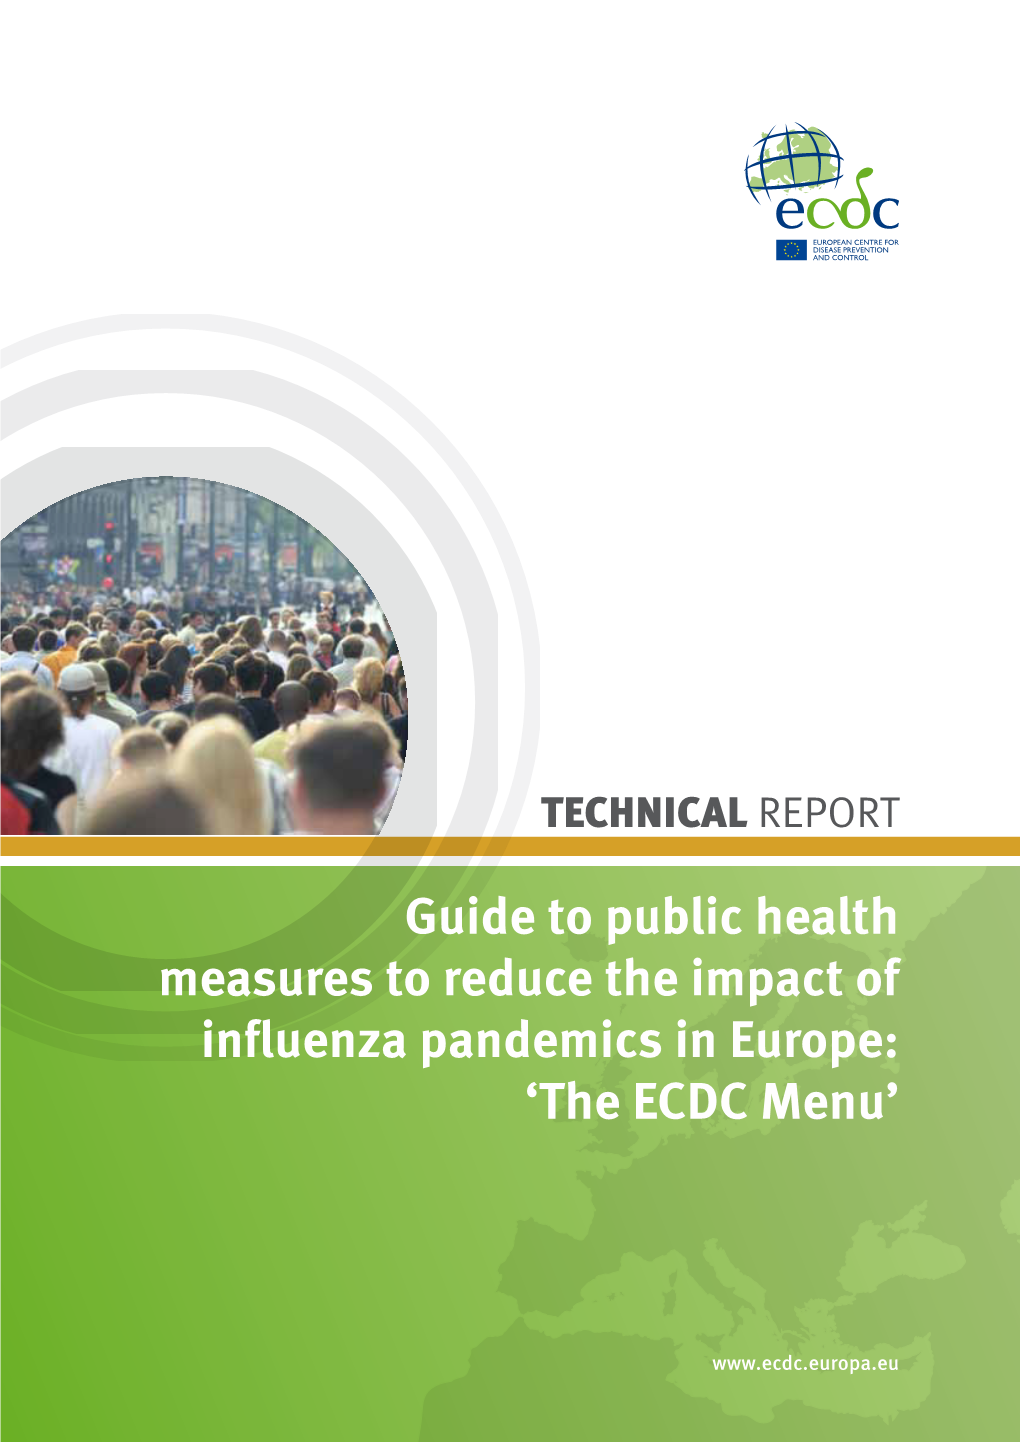 Guide to Public Health Measures to Reduce the Impact of Influenza Pandemics in Europe: ‘The ECDC Menu’